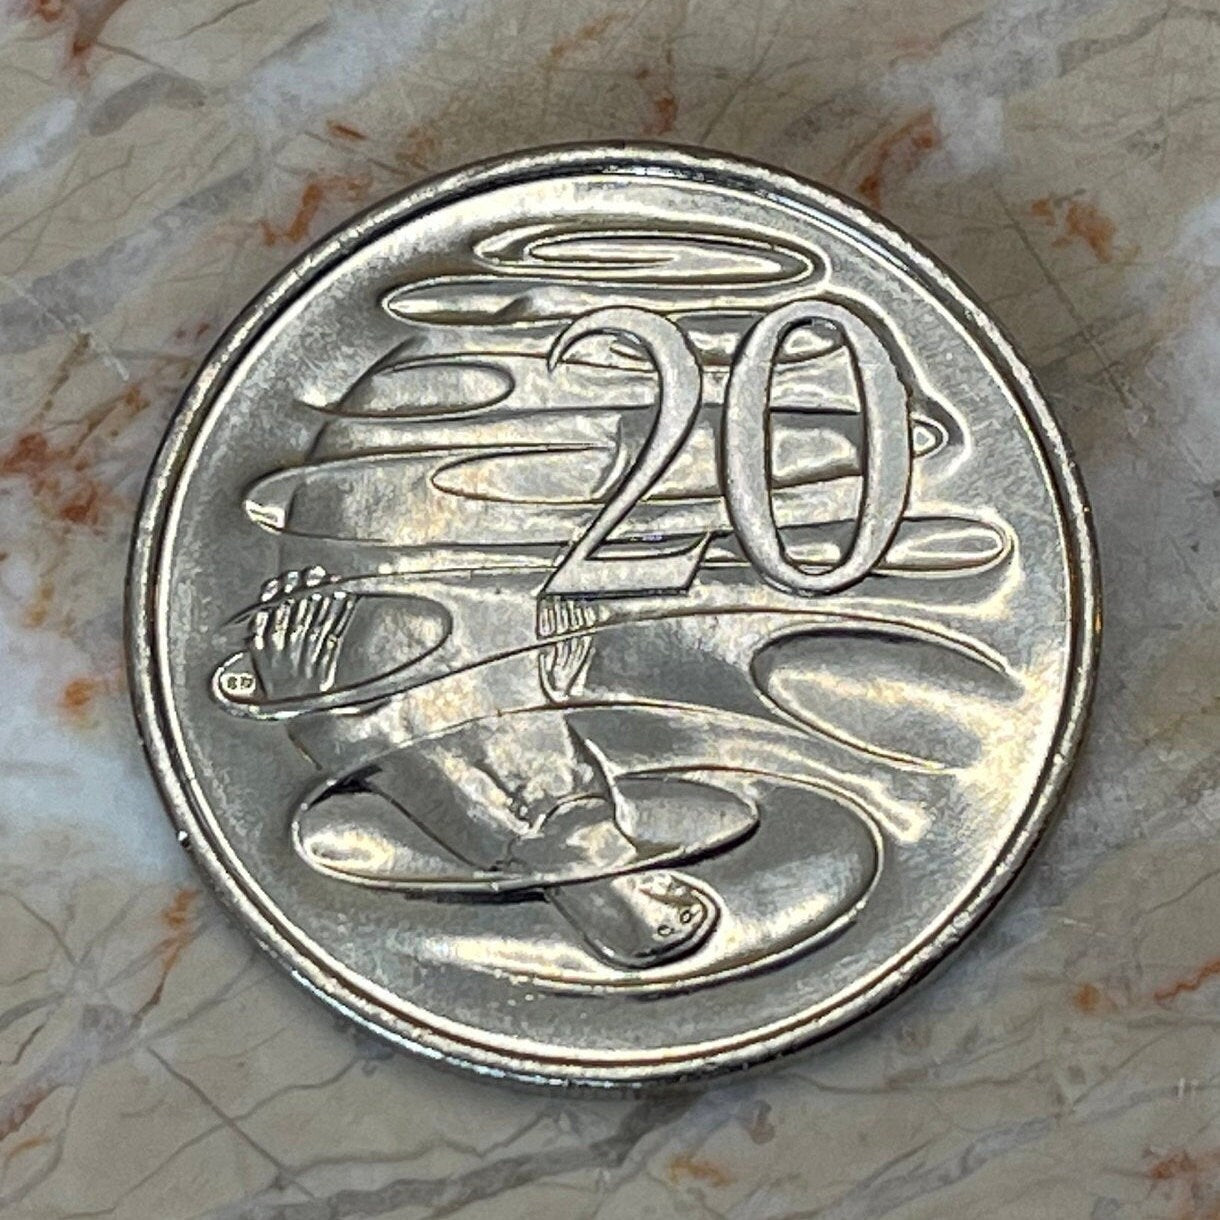 Platypus 20 Cent Australia Authentic Coin Money for Jewelry and Craft Making 2000